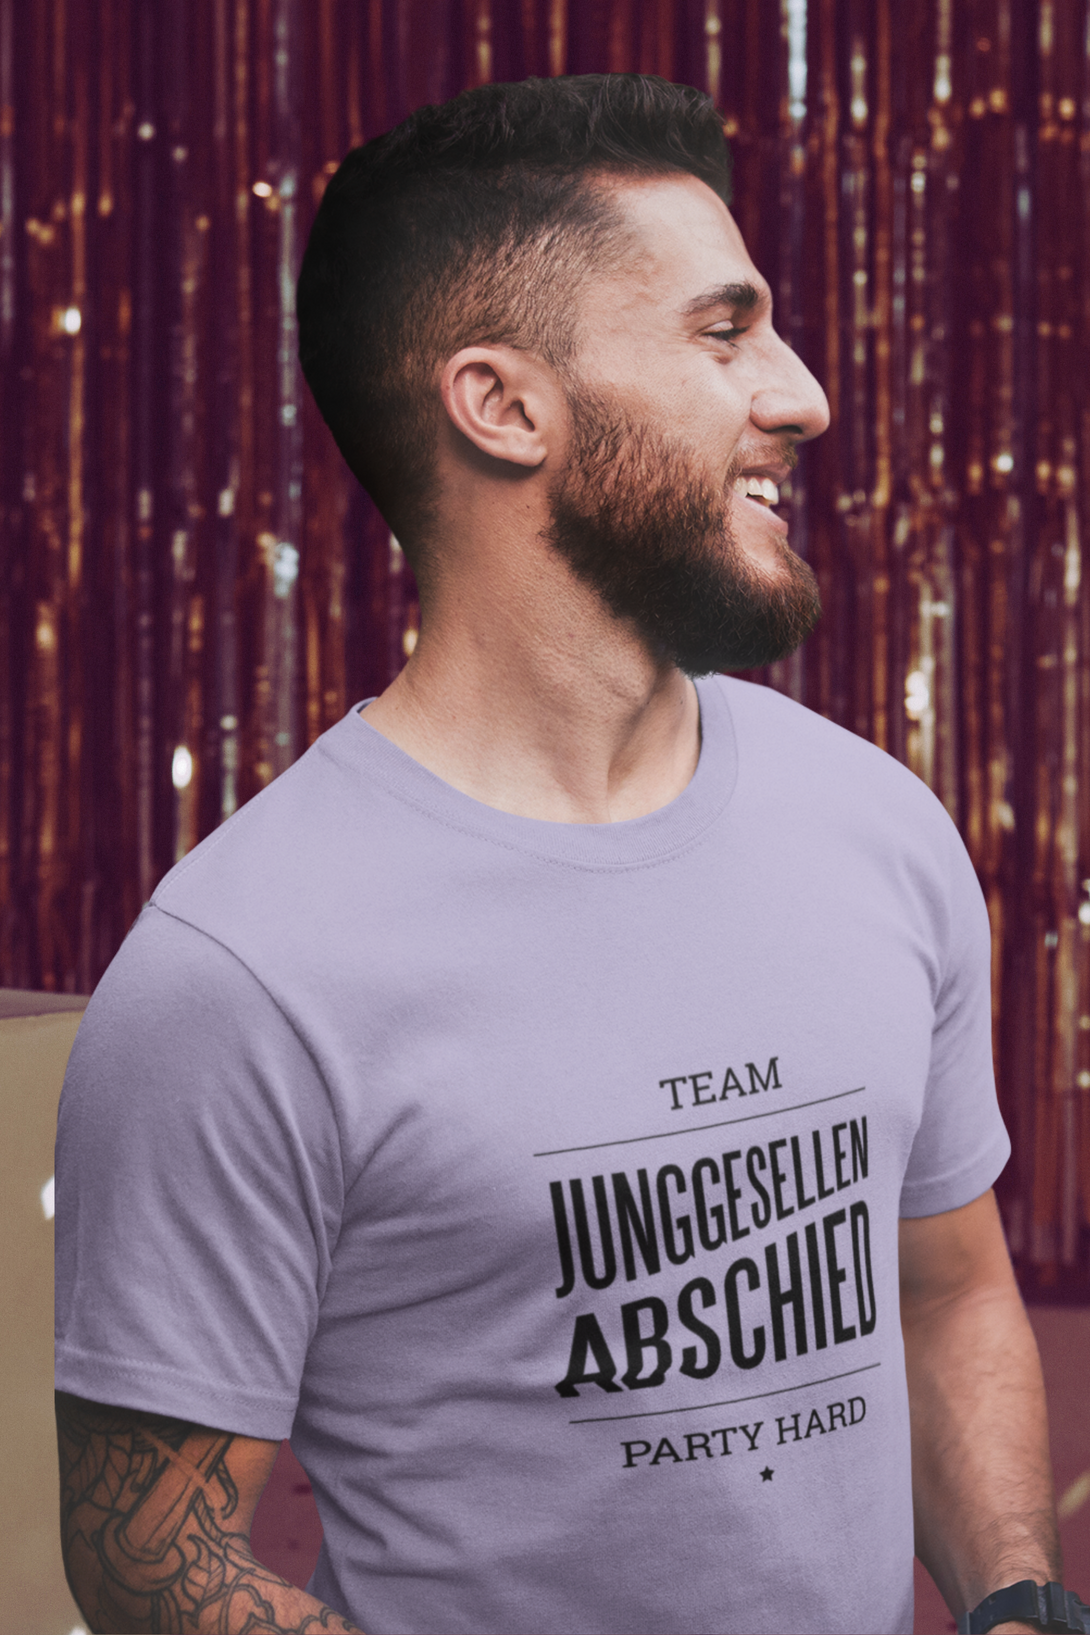 German Bachelor Party Printed T-Shirt For Men - WowWaves - 4